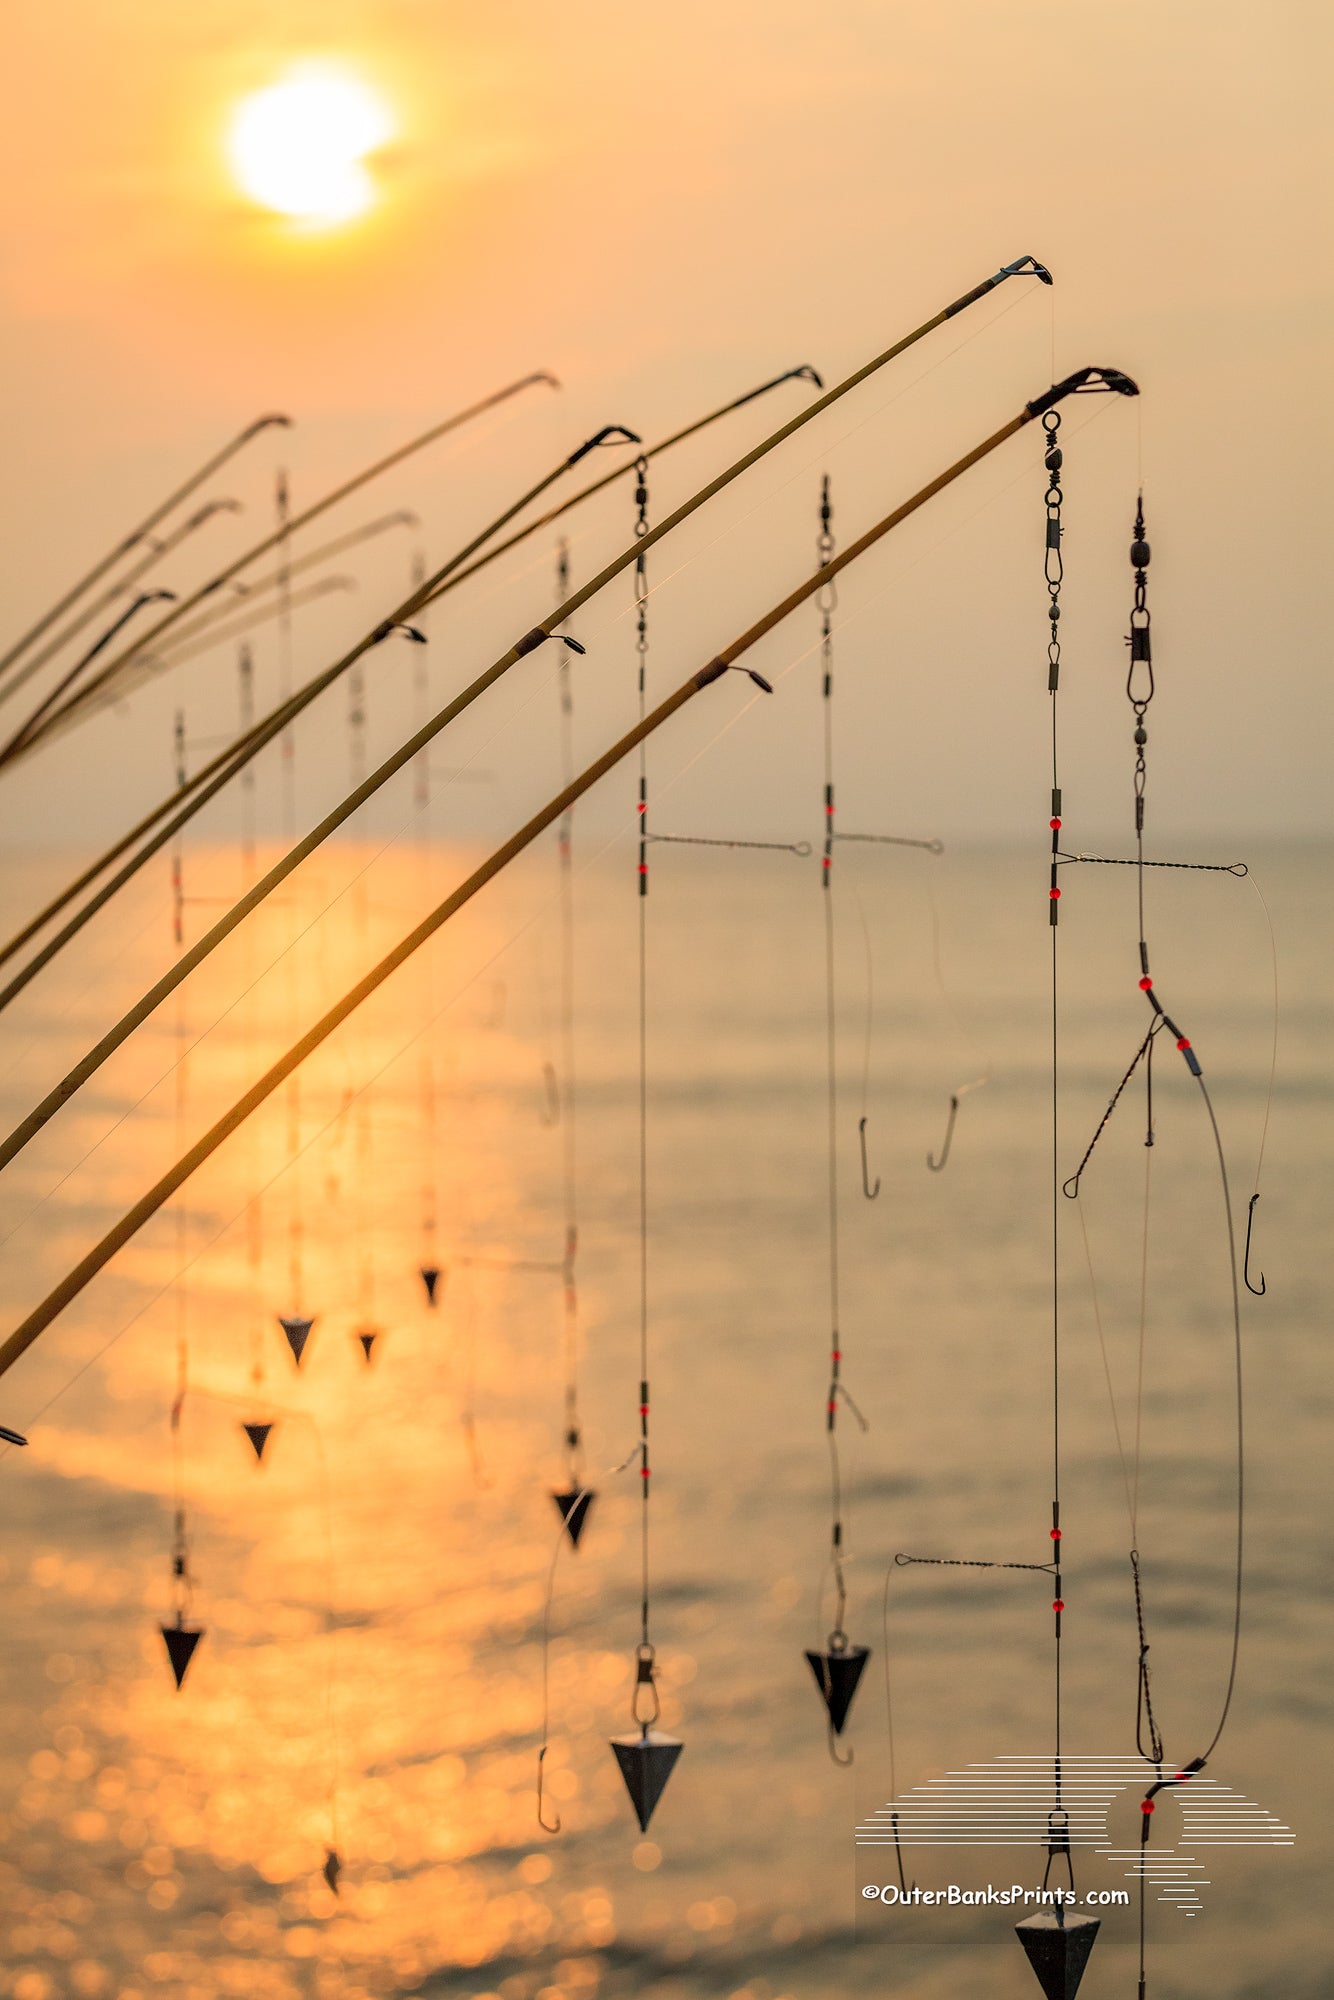 A line of fishing poles silhouetted against the sun at Avalon pier Kill Devil Hills.